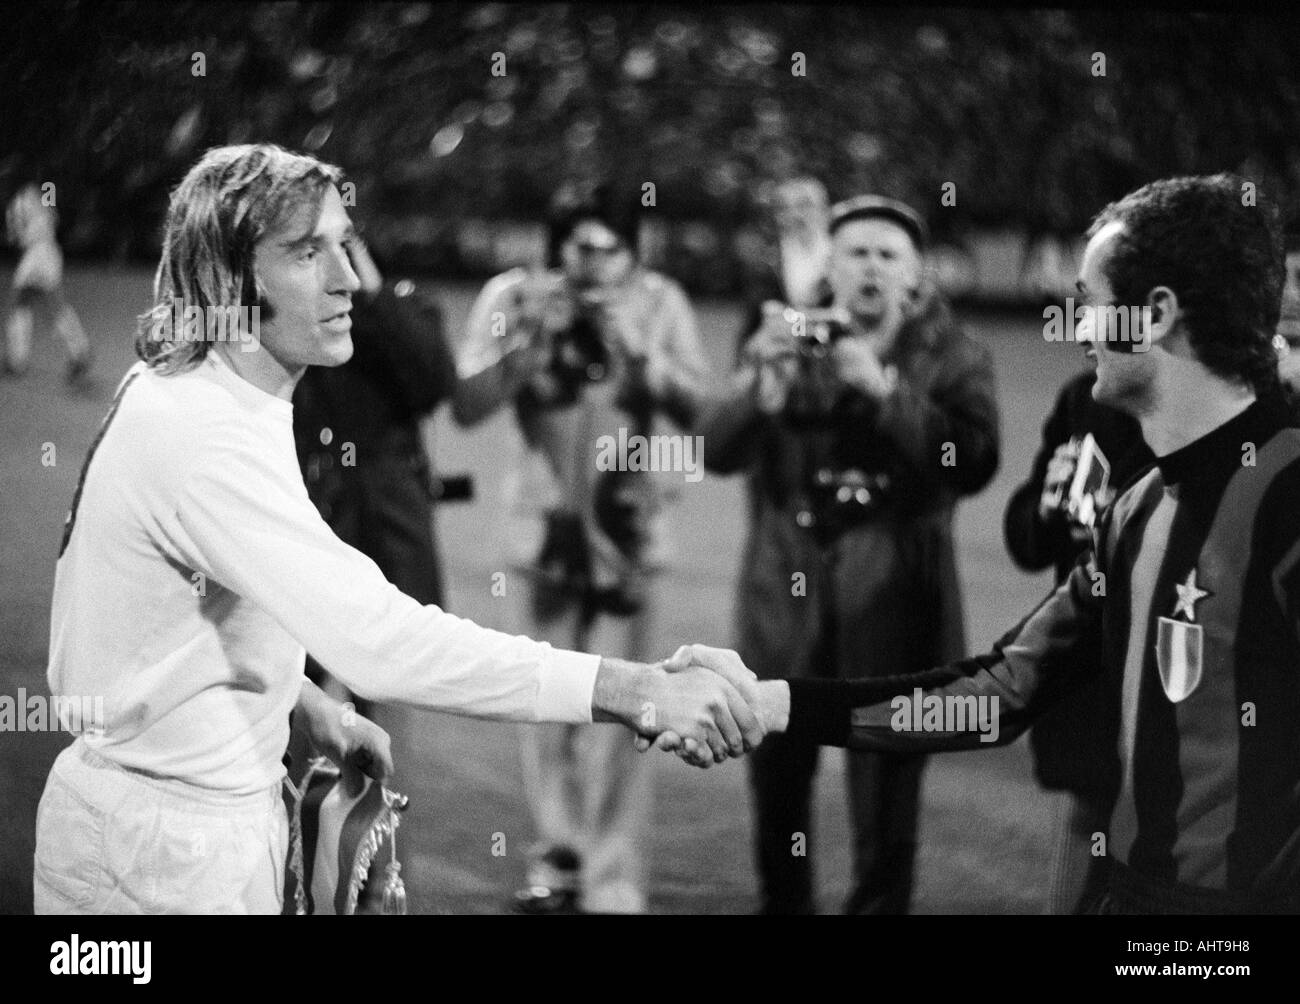 football, European Cup, 1971/1972, eighth final, first leg, Borussia Moenchengladbach versus Inter Mailand 7:1, Boekelberg Stadium in Moenchengladbach, toss-up and welcome, team captains Guenter Netzer (MG, left) and Sandro Mazzola (Milan, right), due to Stock Photo